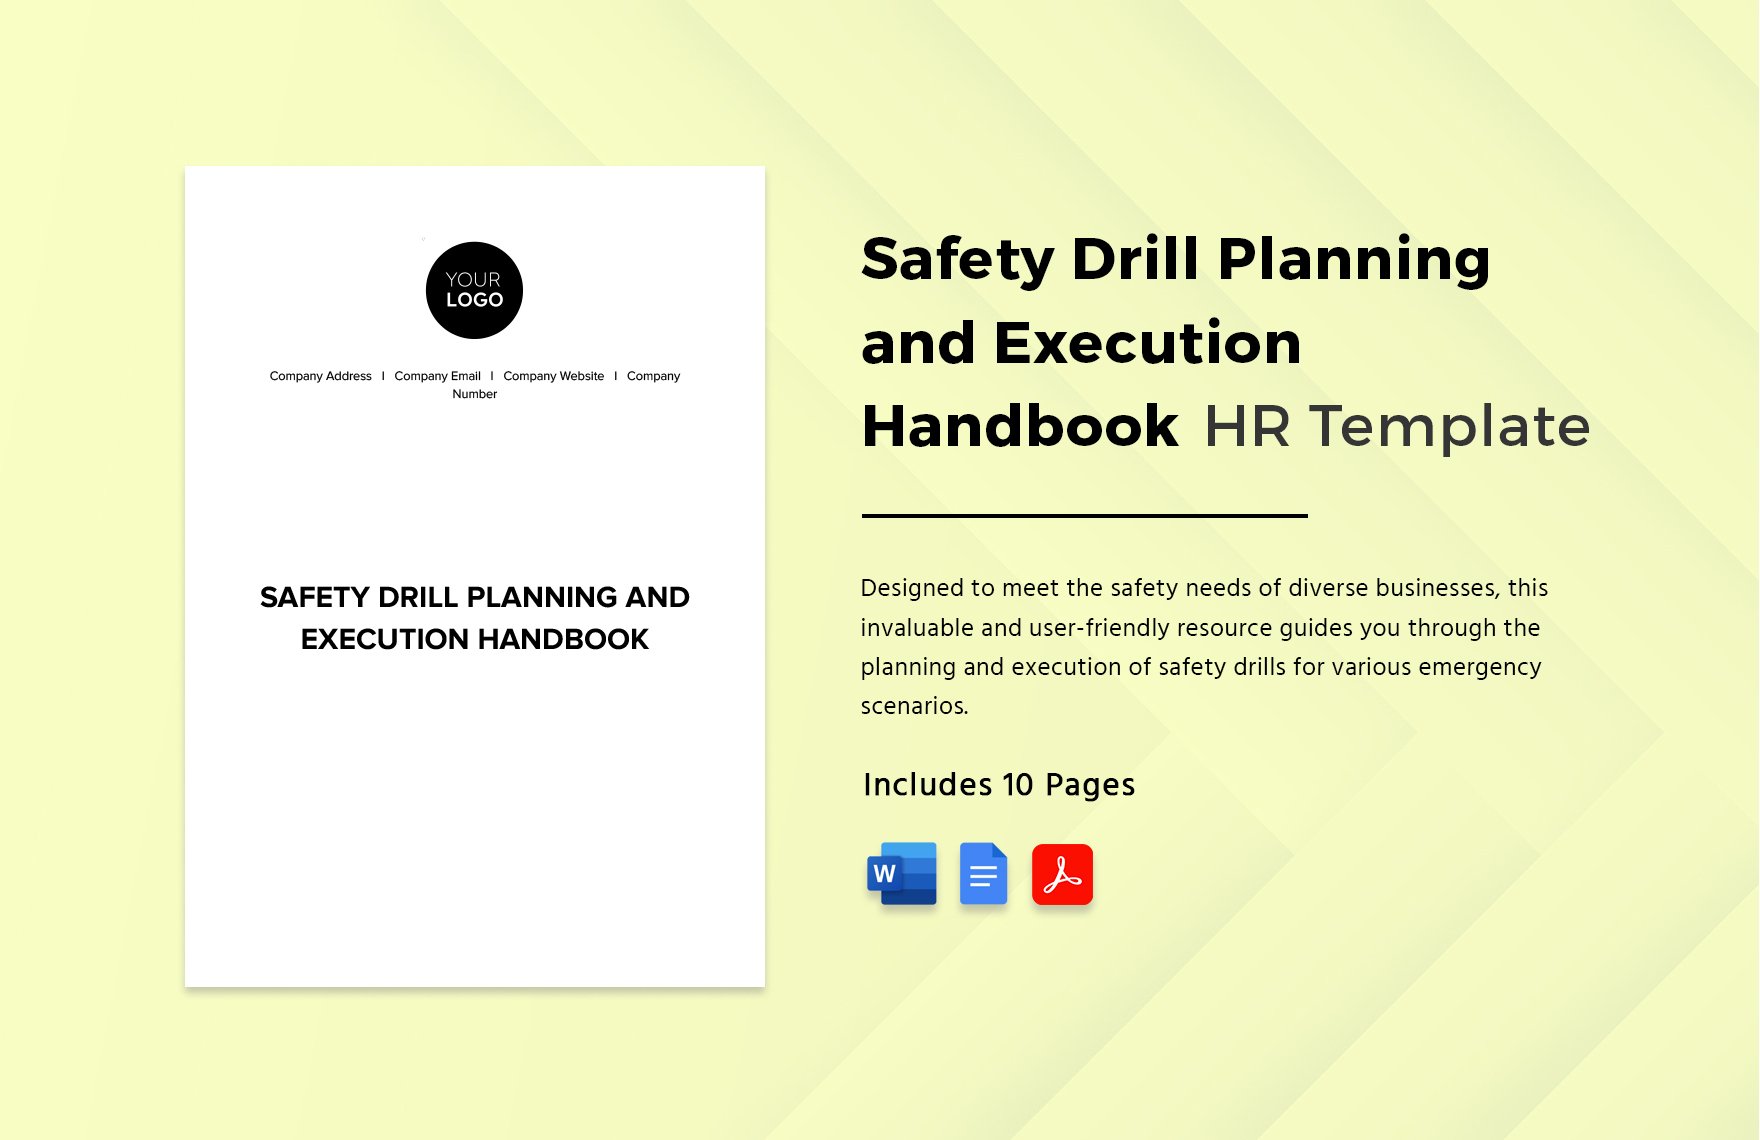 Safety Drill Planning and Execution Handbook HR Template in Word, Google Docs, PDF